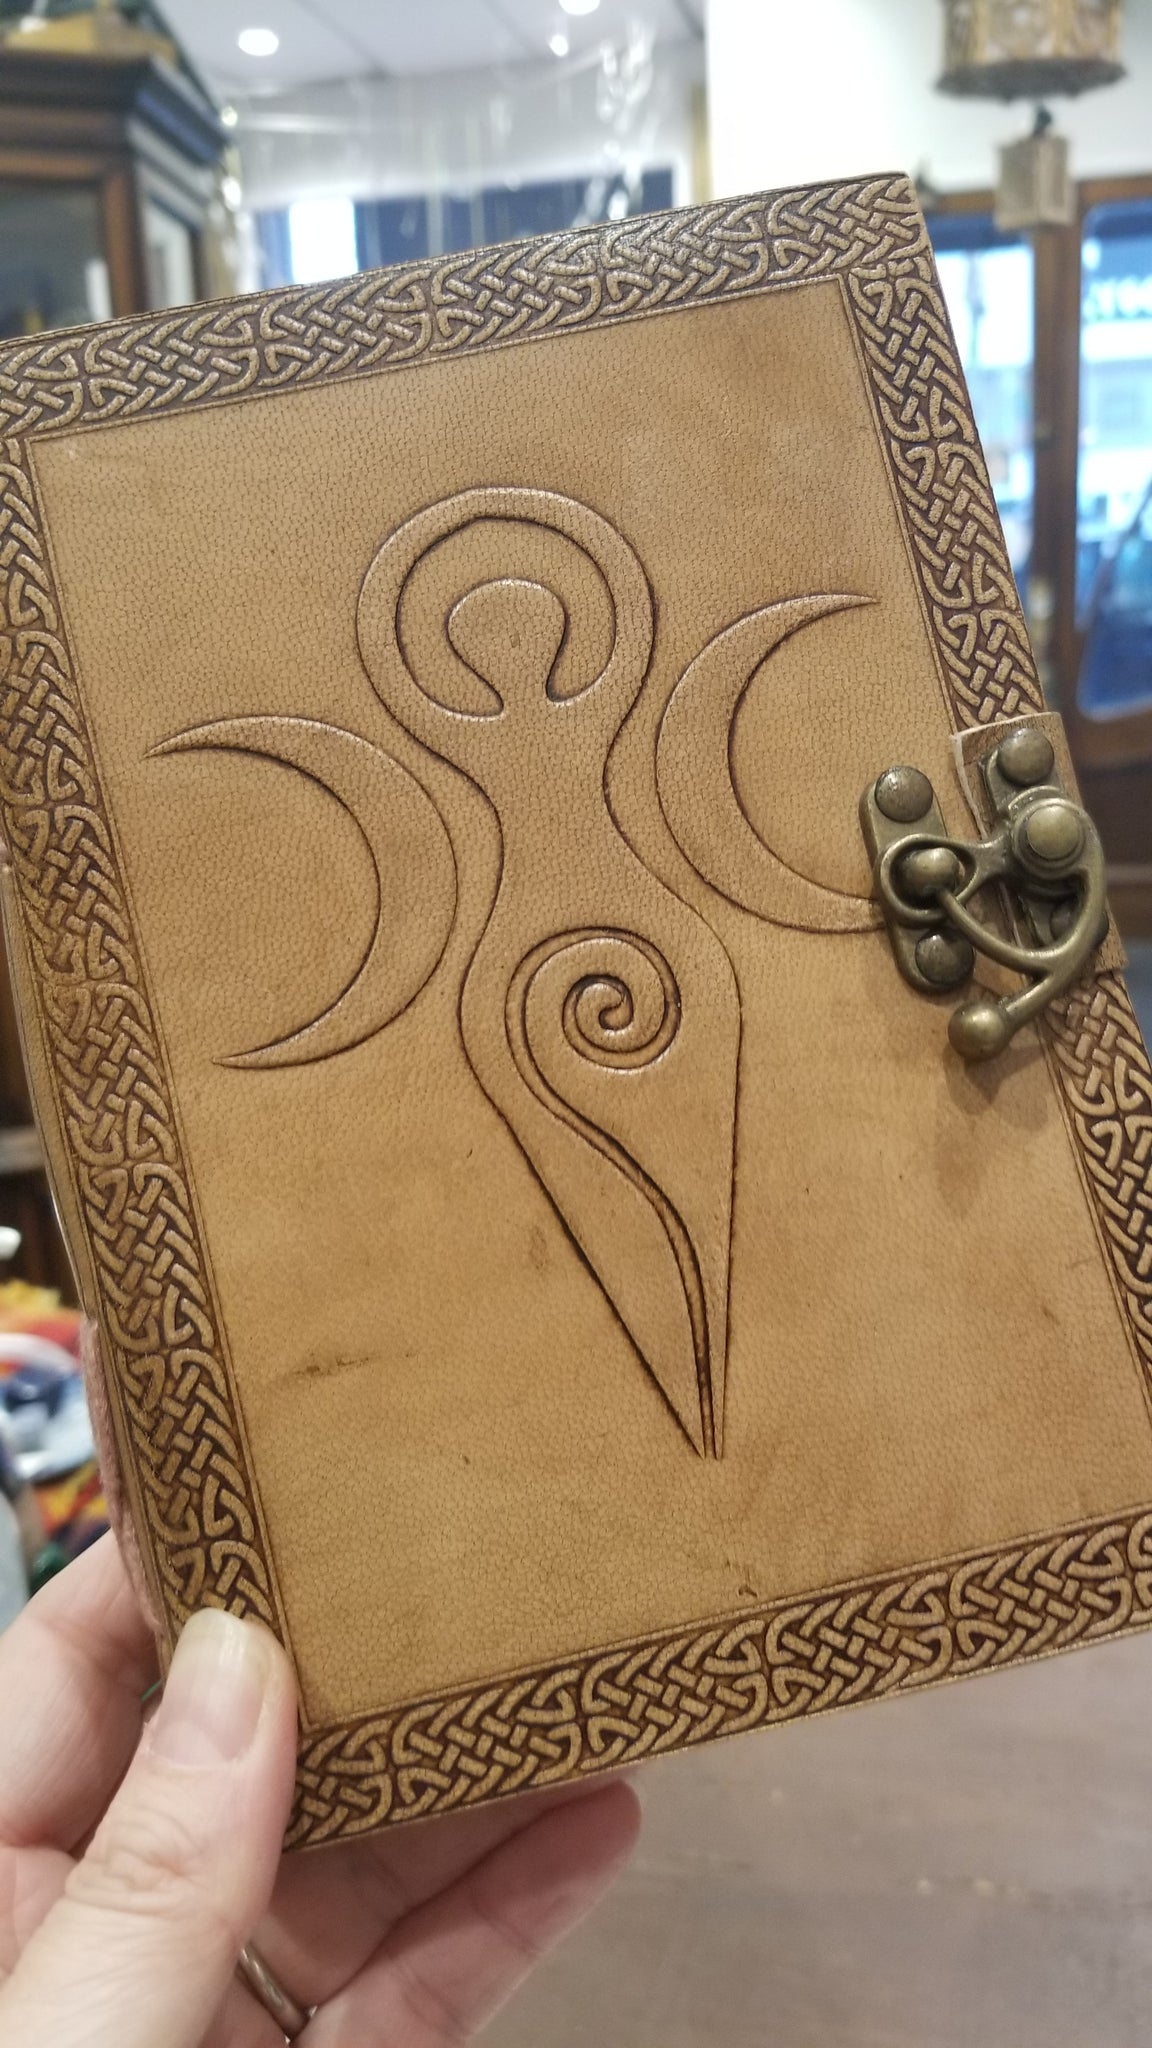 Triple moon goddess leather bound clasped journal